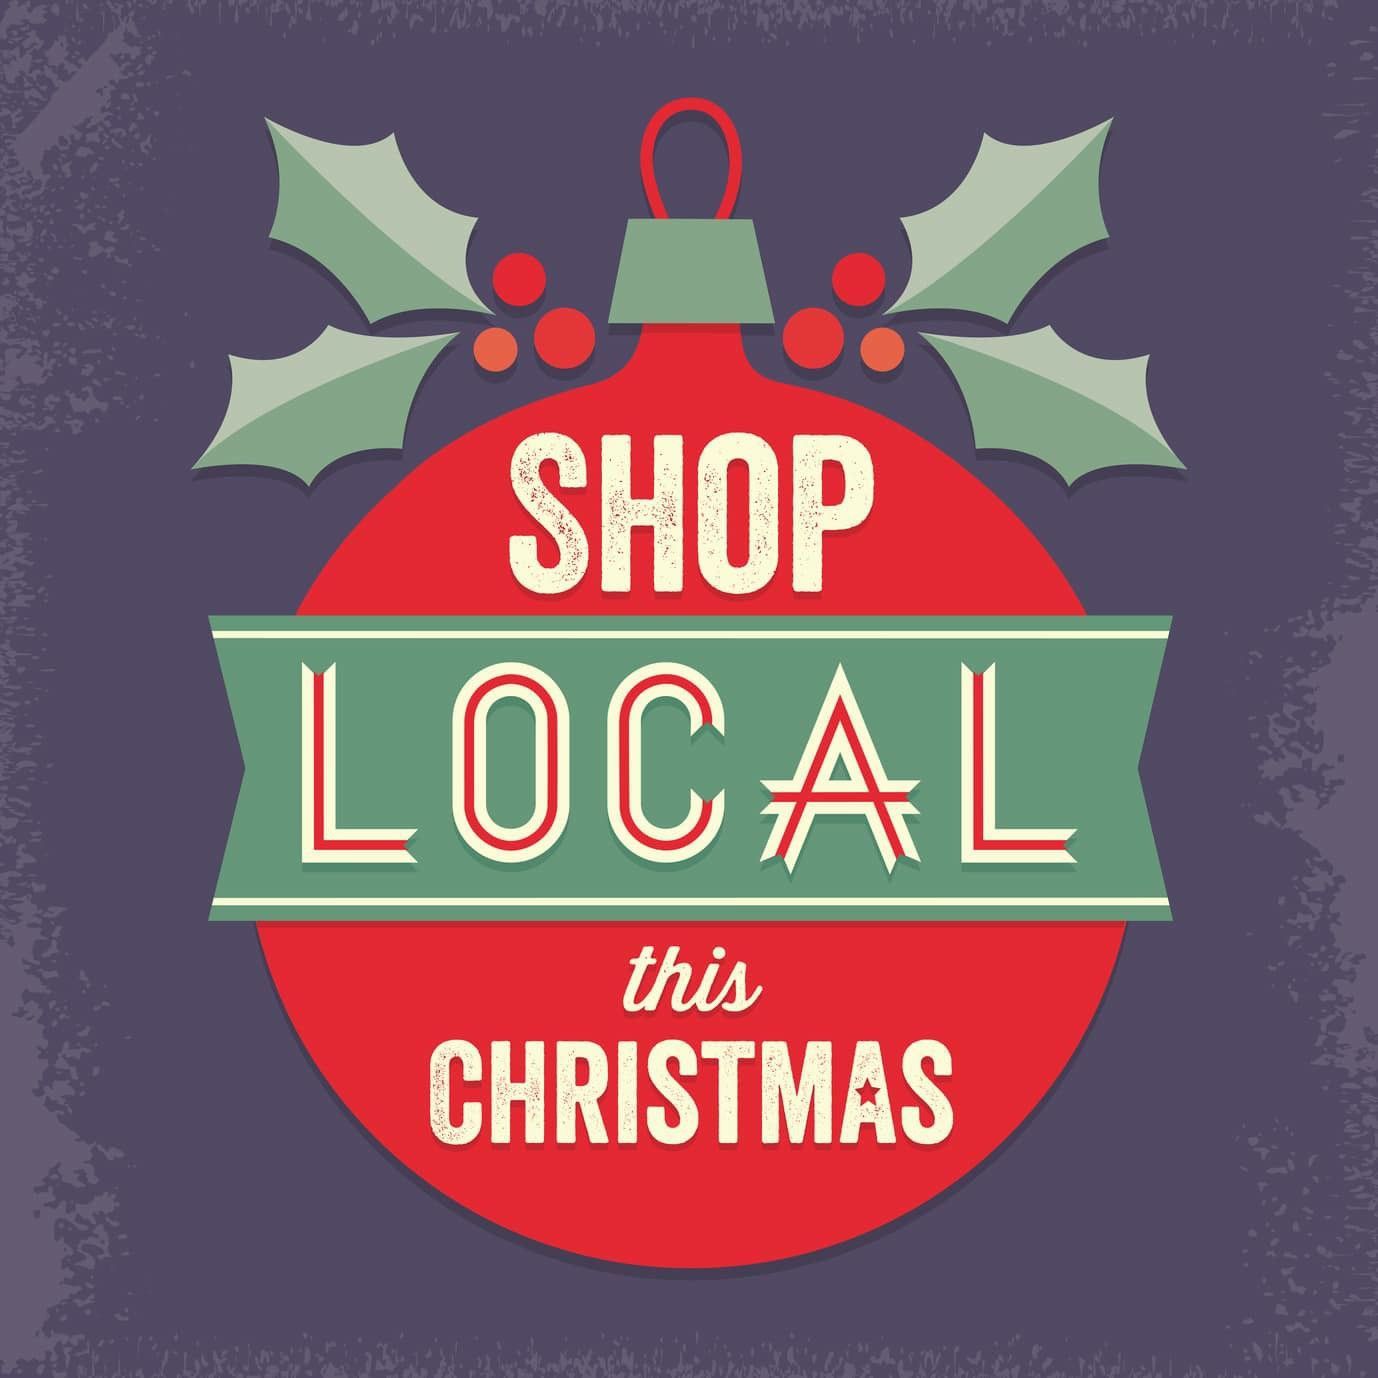 Reasons to shop local FIRST this holiday season